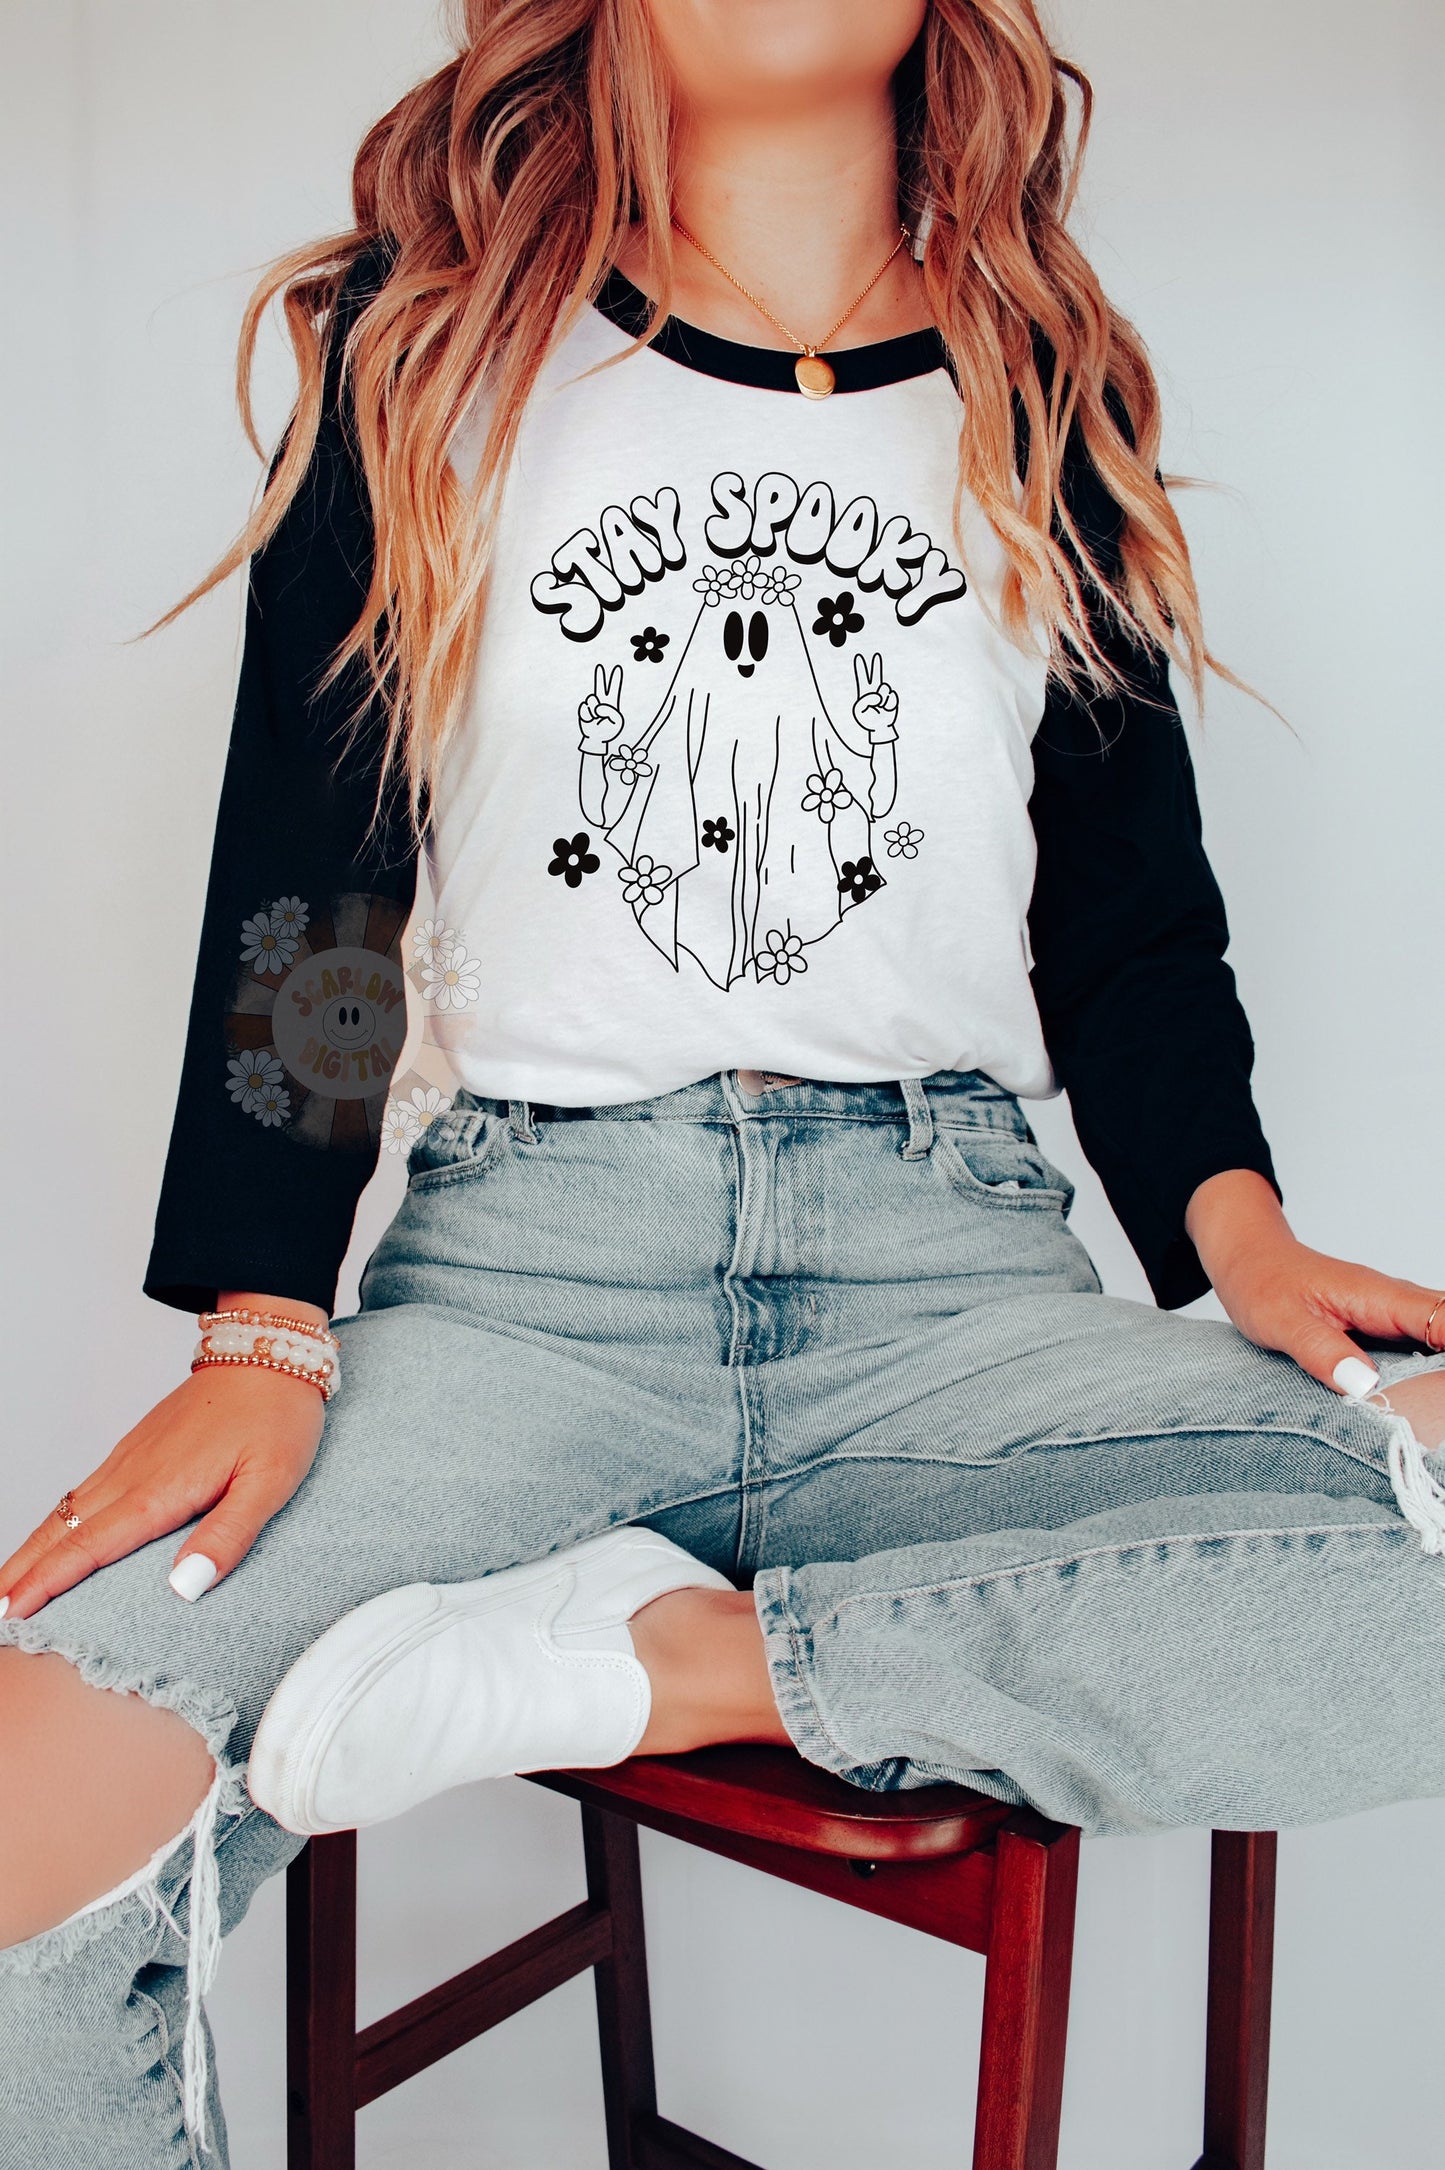 Stay Spooky SVG Digital Design Download, Halloween png, spooky season SVG, groovy ghost png, Cricut cut files, fall SVG, autumn png design